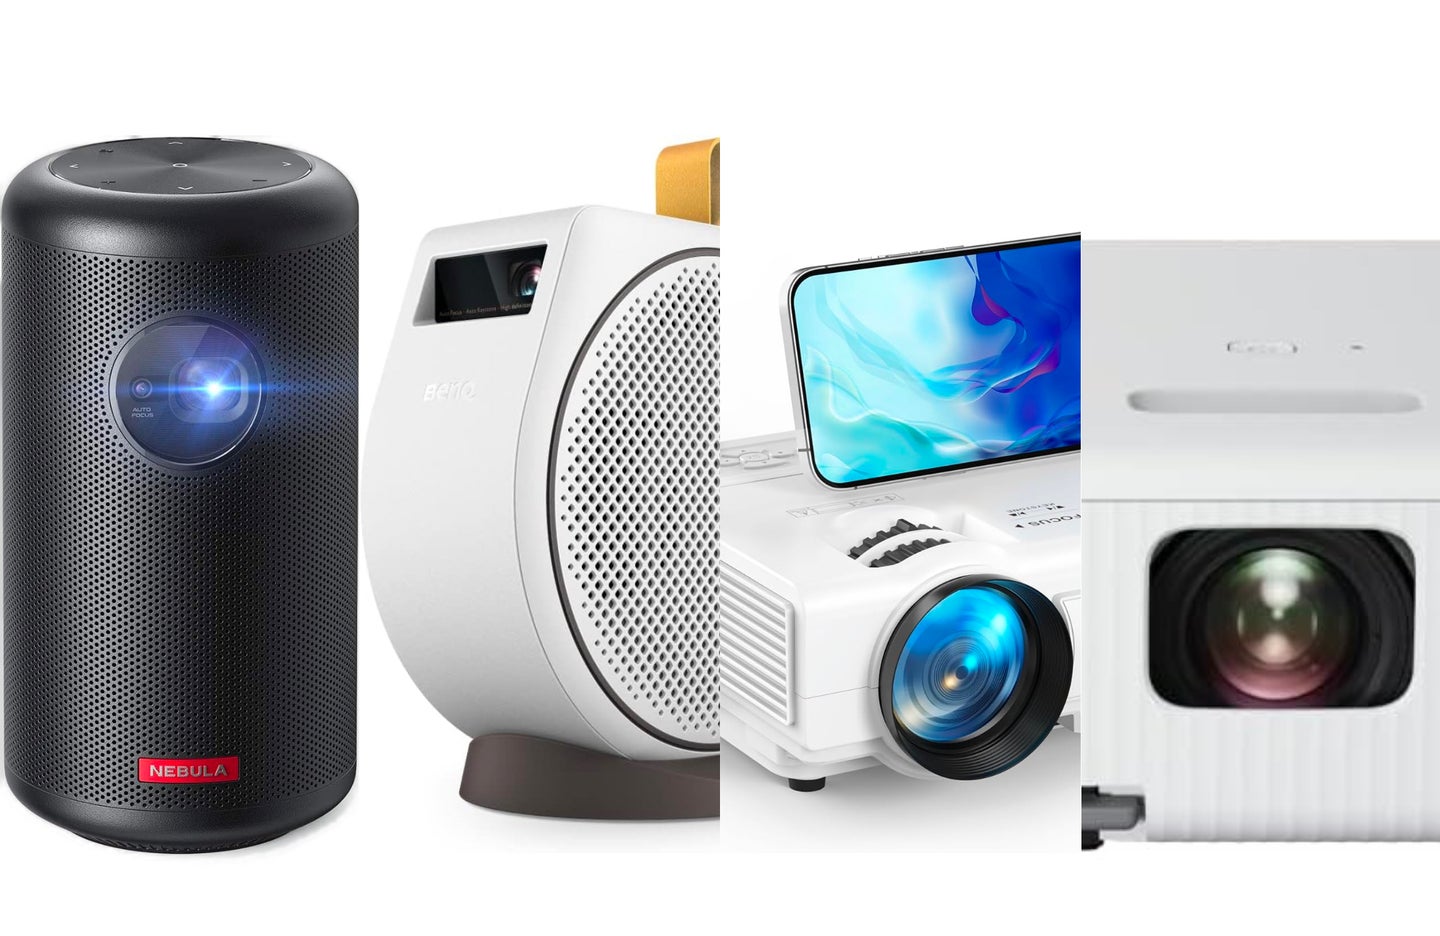 The best projectors under $500 on a plain white background.